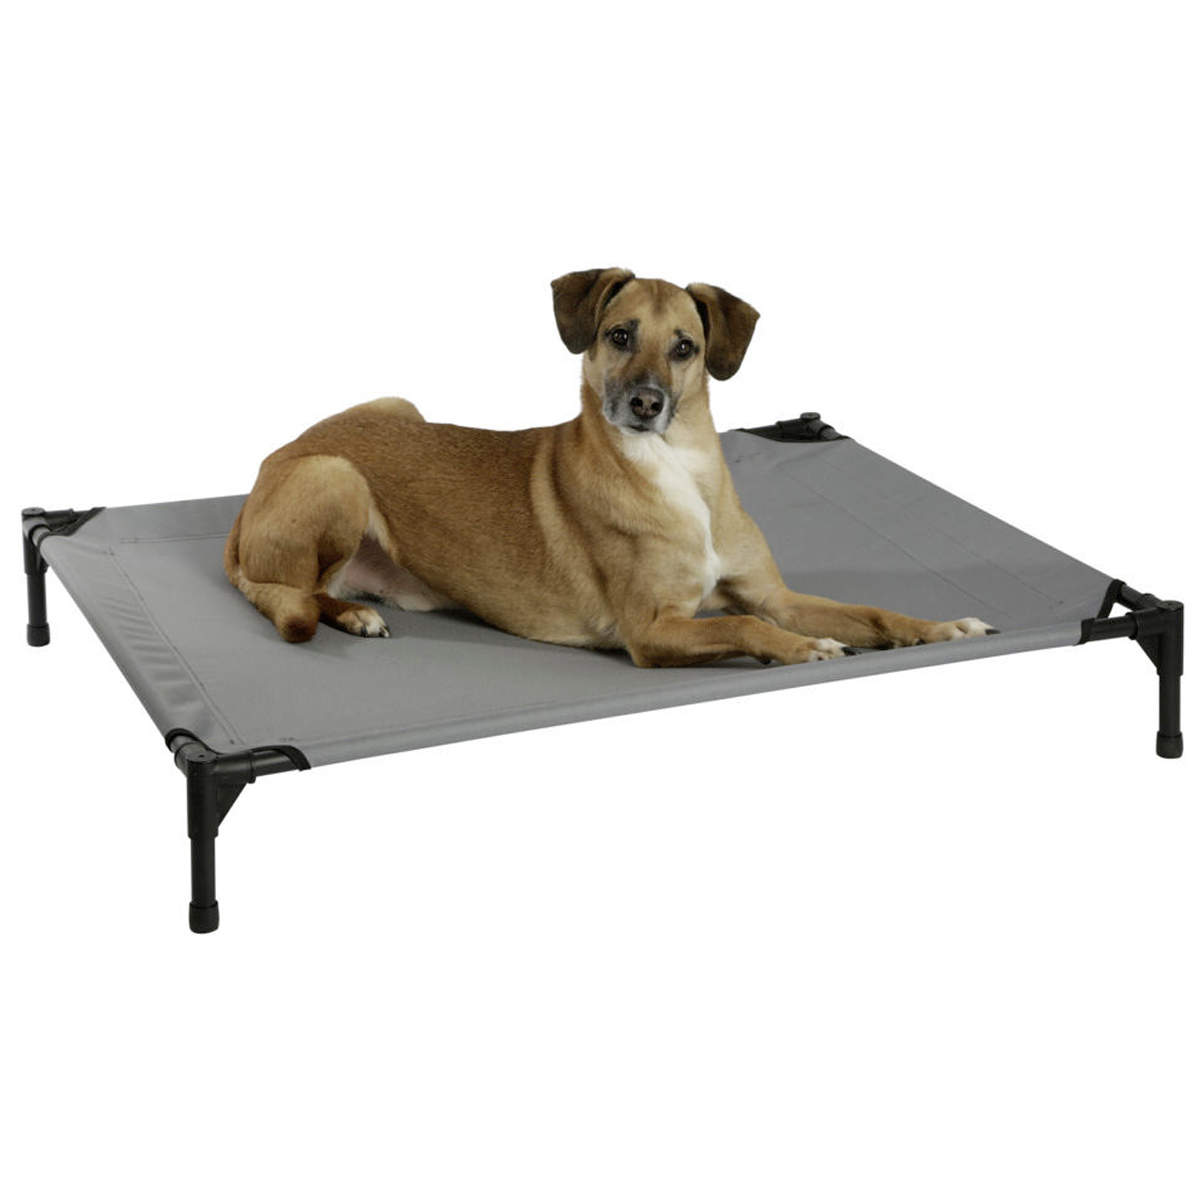 Kerbl Dog lounger with sun canopy vacation top